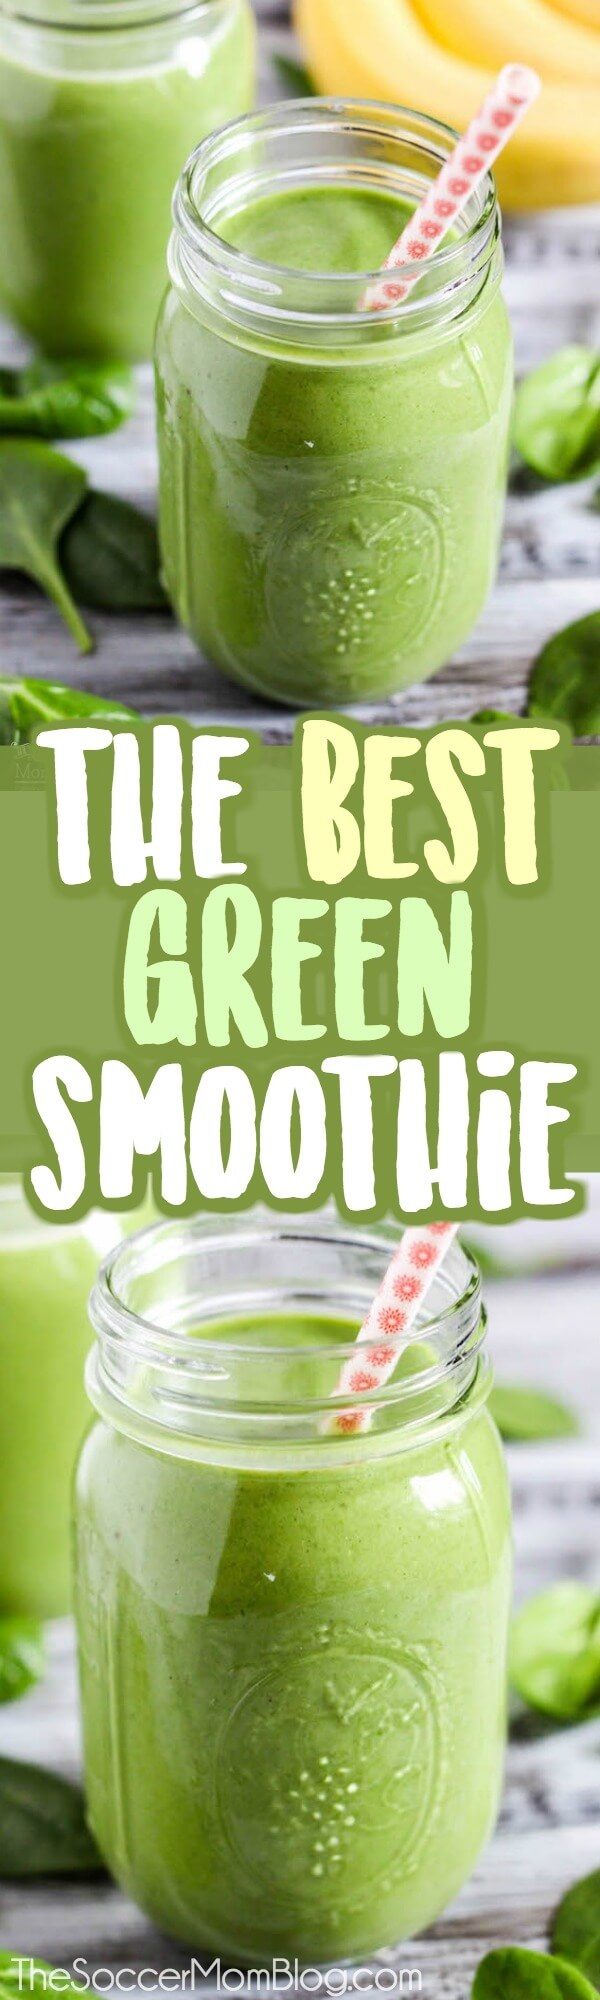 Green, good-for-you, AND tastes amazing?! Seriously, this is the BEST green protein smoothie ever! Forget those slimy-looking drinks you USED to choke down in the name of health...this healthy green smoothie is absolutely delicious!! High protein - Gluten free - Dairy free - No added sugar